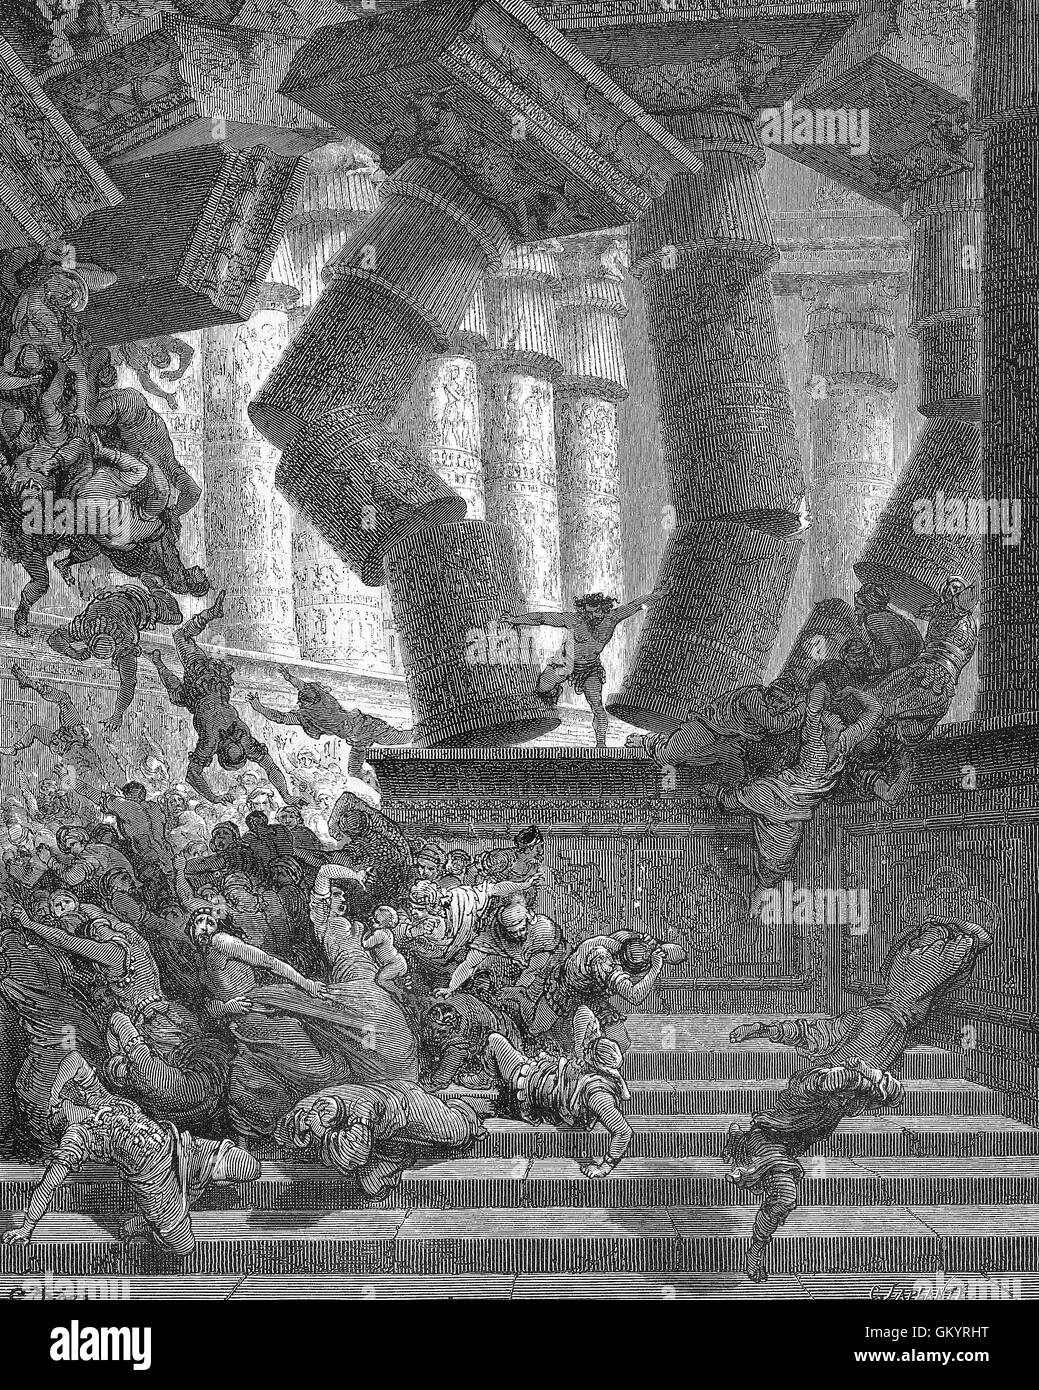 Engraving of The Death of Samson by Gustave Doré Stock Photo - Alamy